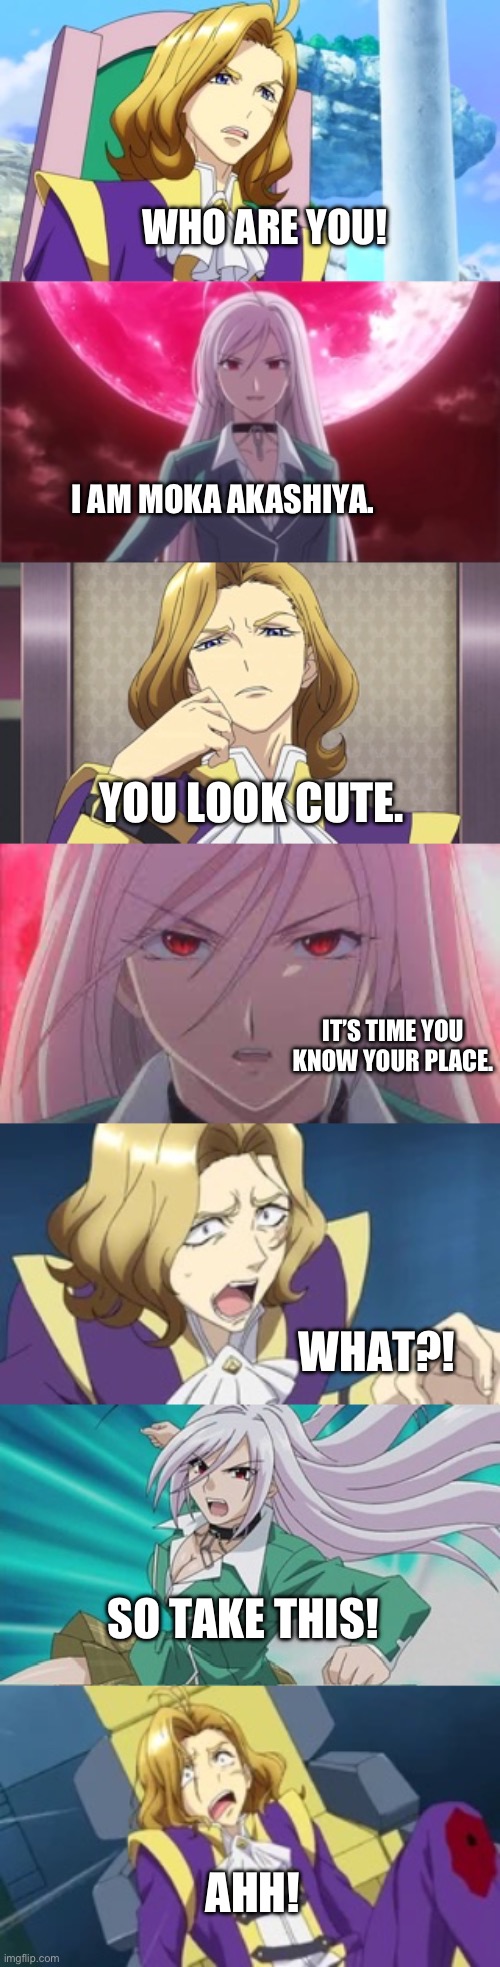 Julio Meet Moka | WHO ARE YOU! I AM MOKA AKASHIYA. YOU LOOK CUTE. IT’S TIME YOU KNOW YOUR PLACE. WHAT?! SO TAKE THIS! AHH! | image tagged in anime | made w/ Imgflip meme maker